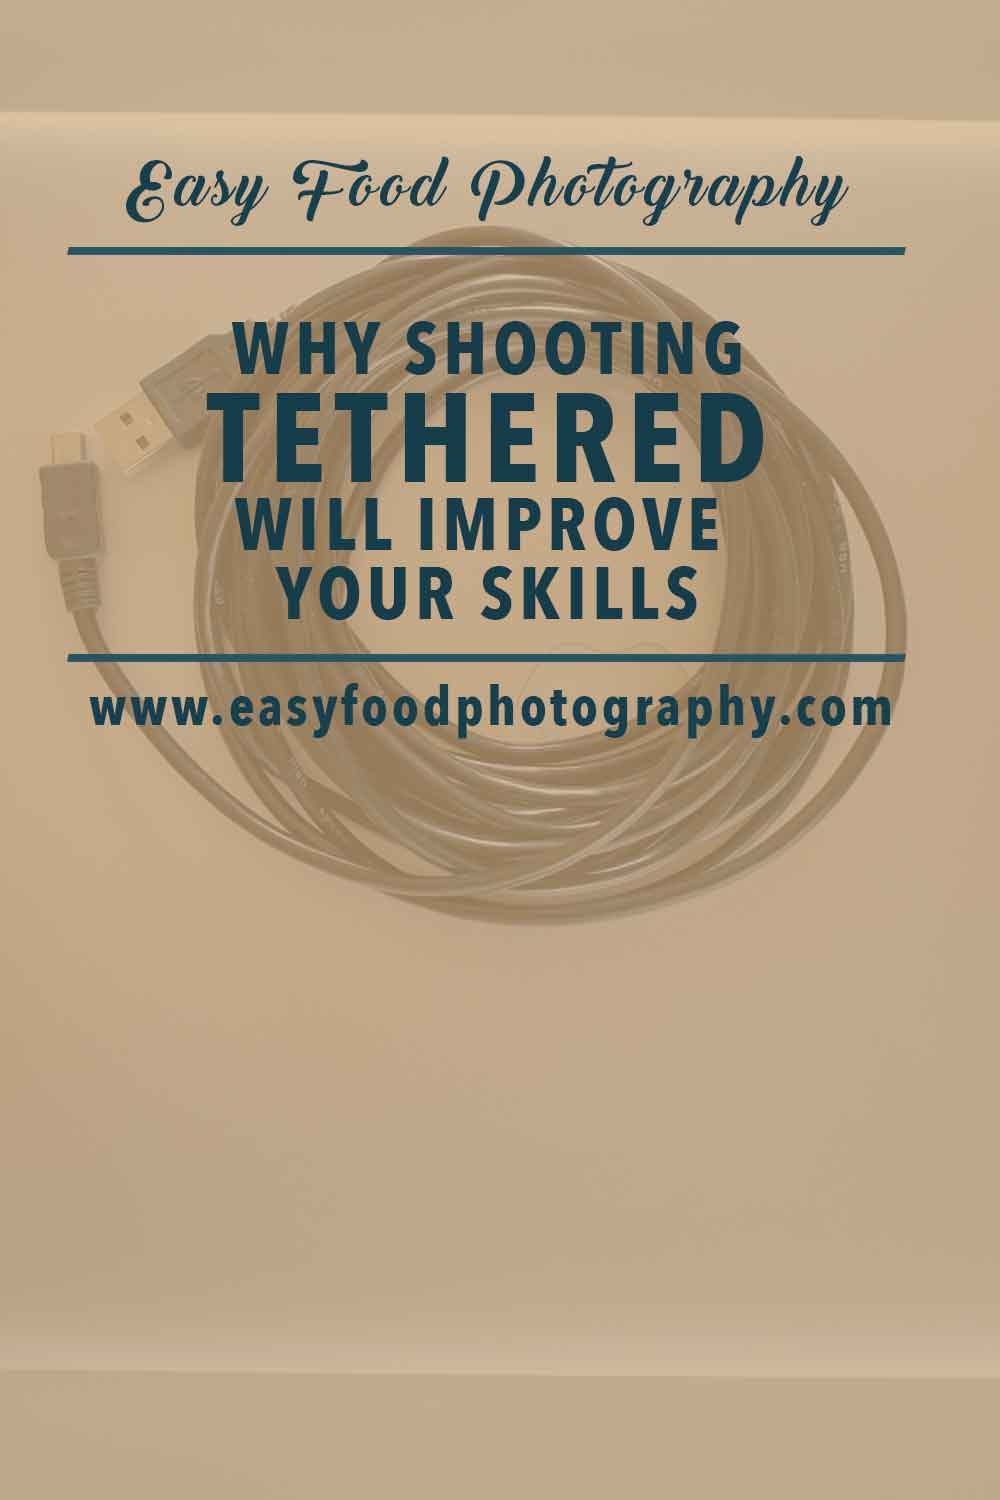 WHY SHOOTING TETHERED WILL IMPROVE YOUR FOOD PHOTOGRAPHY